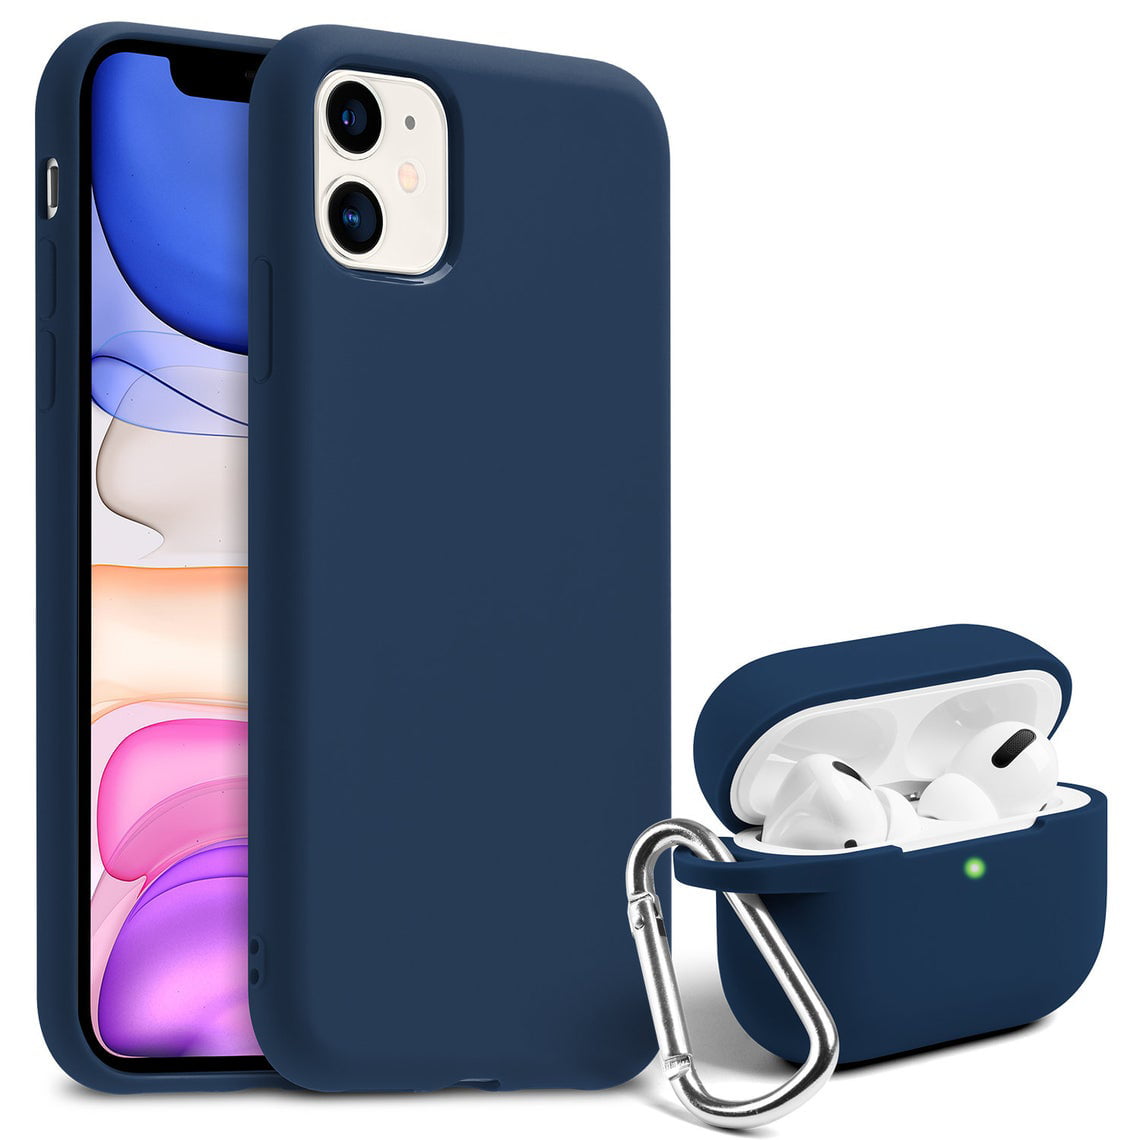 GMYLE iPhone 11 Case and Airpods Pro Case Same Color Bundle Set, Silicone Thin Smooth Full Covered [Enhanced Camera Protection] GMYLE for Apple iPhone 11 6.1" with Airpods Pro (Black) - Walmart.com